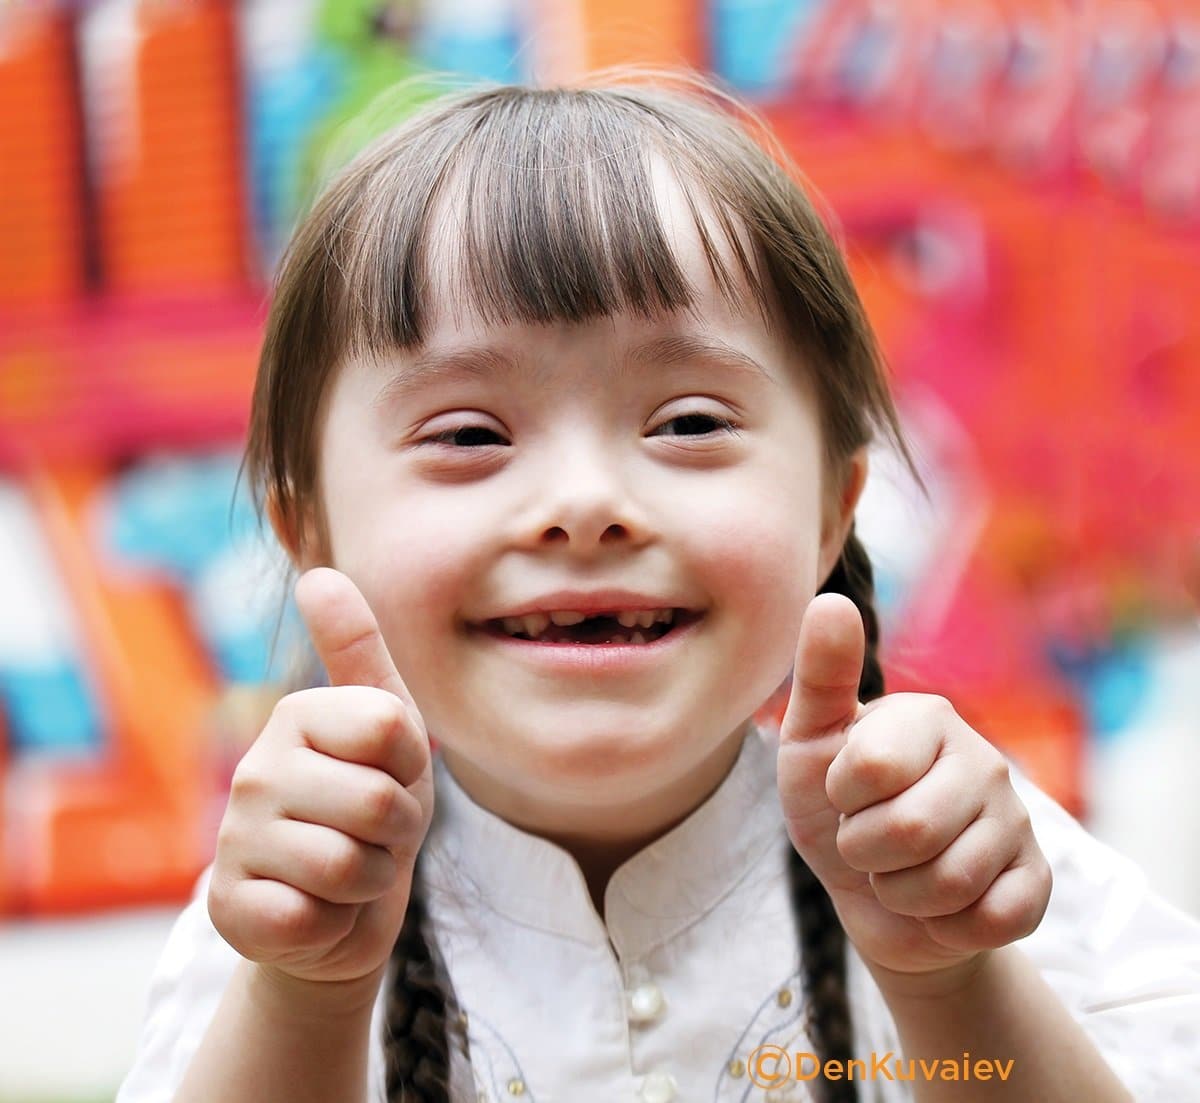 New Trans-NIH INCLUDE Project for Down Syndrome will provide up to $261M Over 5 Years